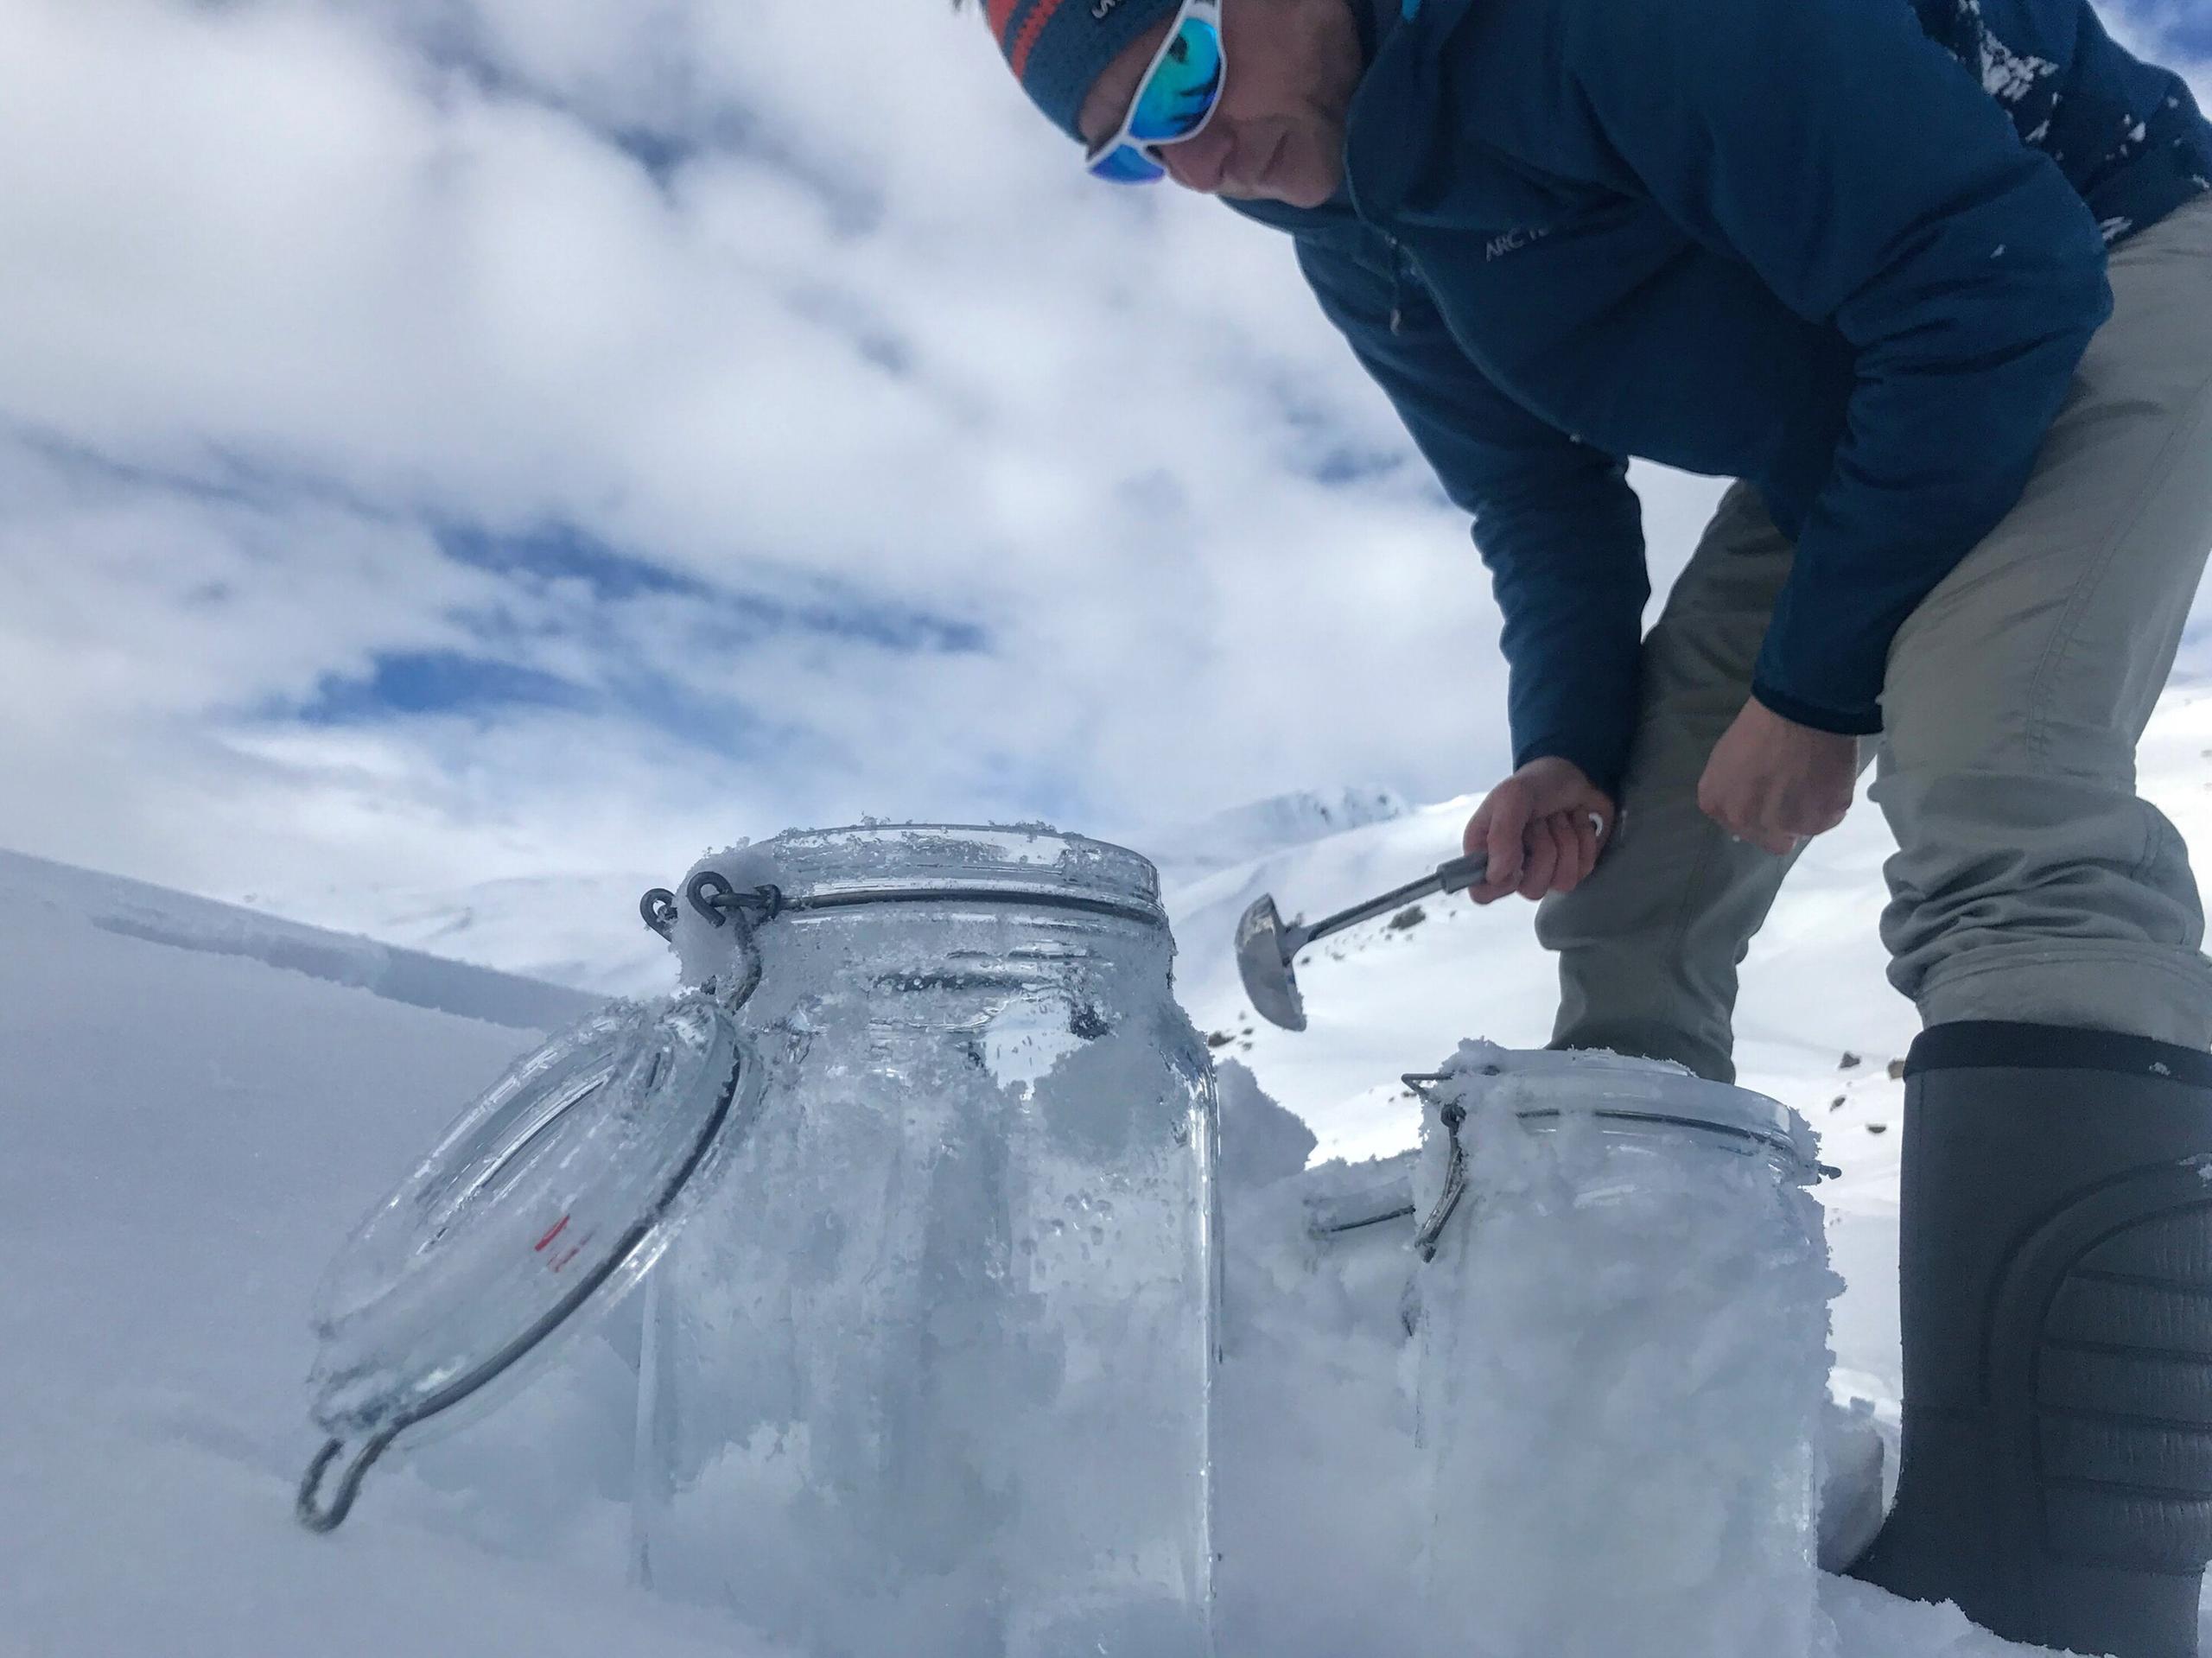 Fresh snow is filled with a chrome steel scoop into glass containers.